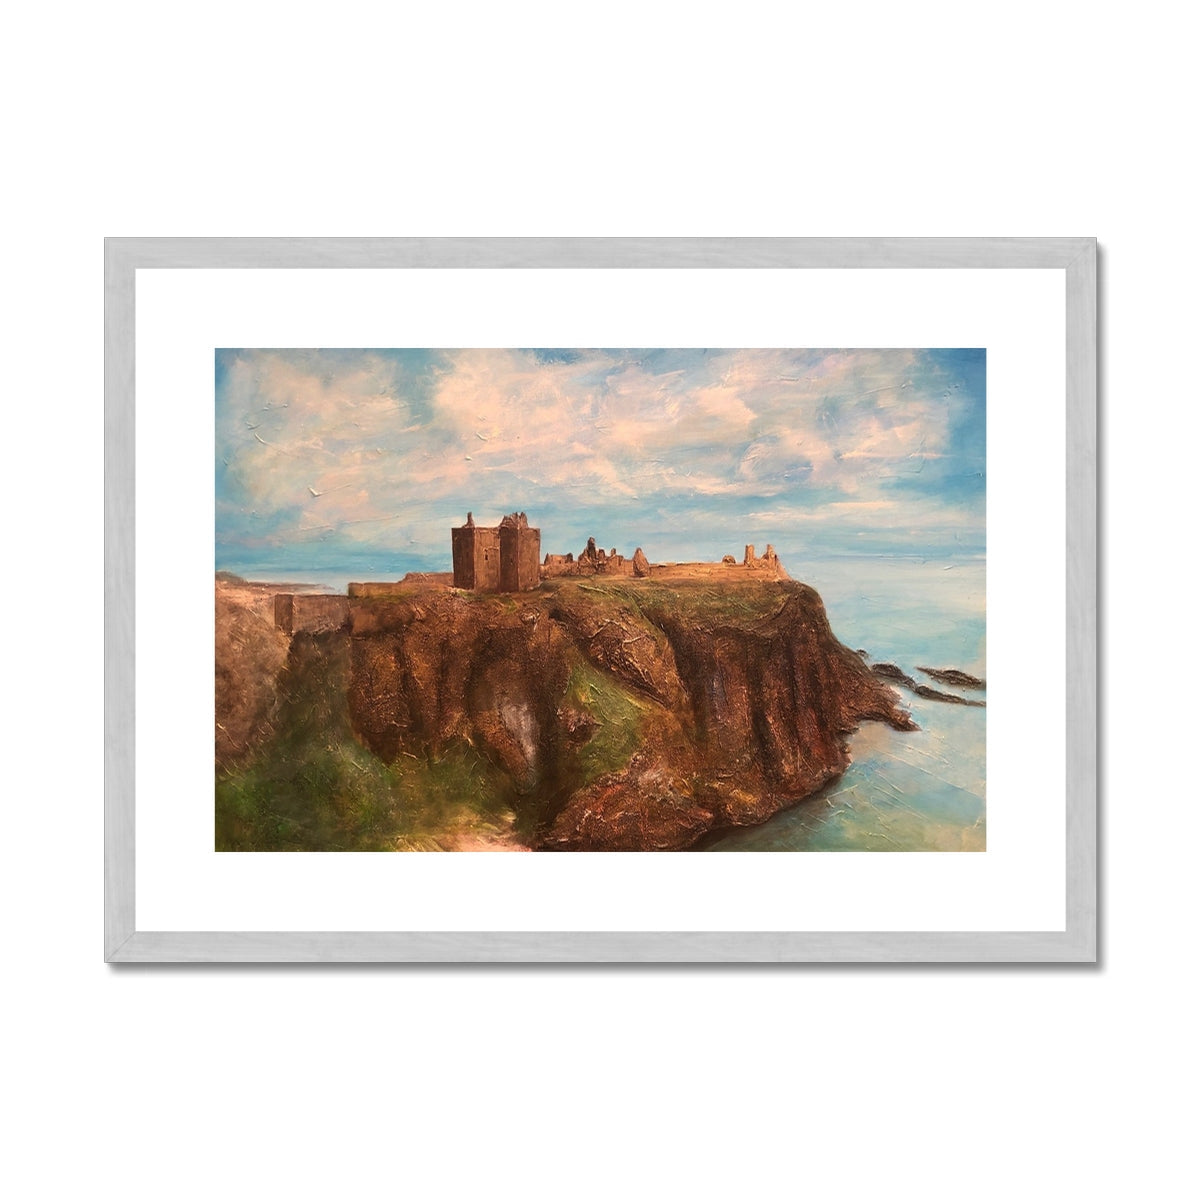 Dunnottar Castle Painting | Antique Framed & Mounted Prints From Scotland-Antique Framed & Mounted Prints-Historic & Iconic Scotland Art Gallery-A2 Landscape-Silver Frame-Paintings, Prints, Homeware, Art Gifts From Scotland By Scottish Artist Kevin Hunter